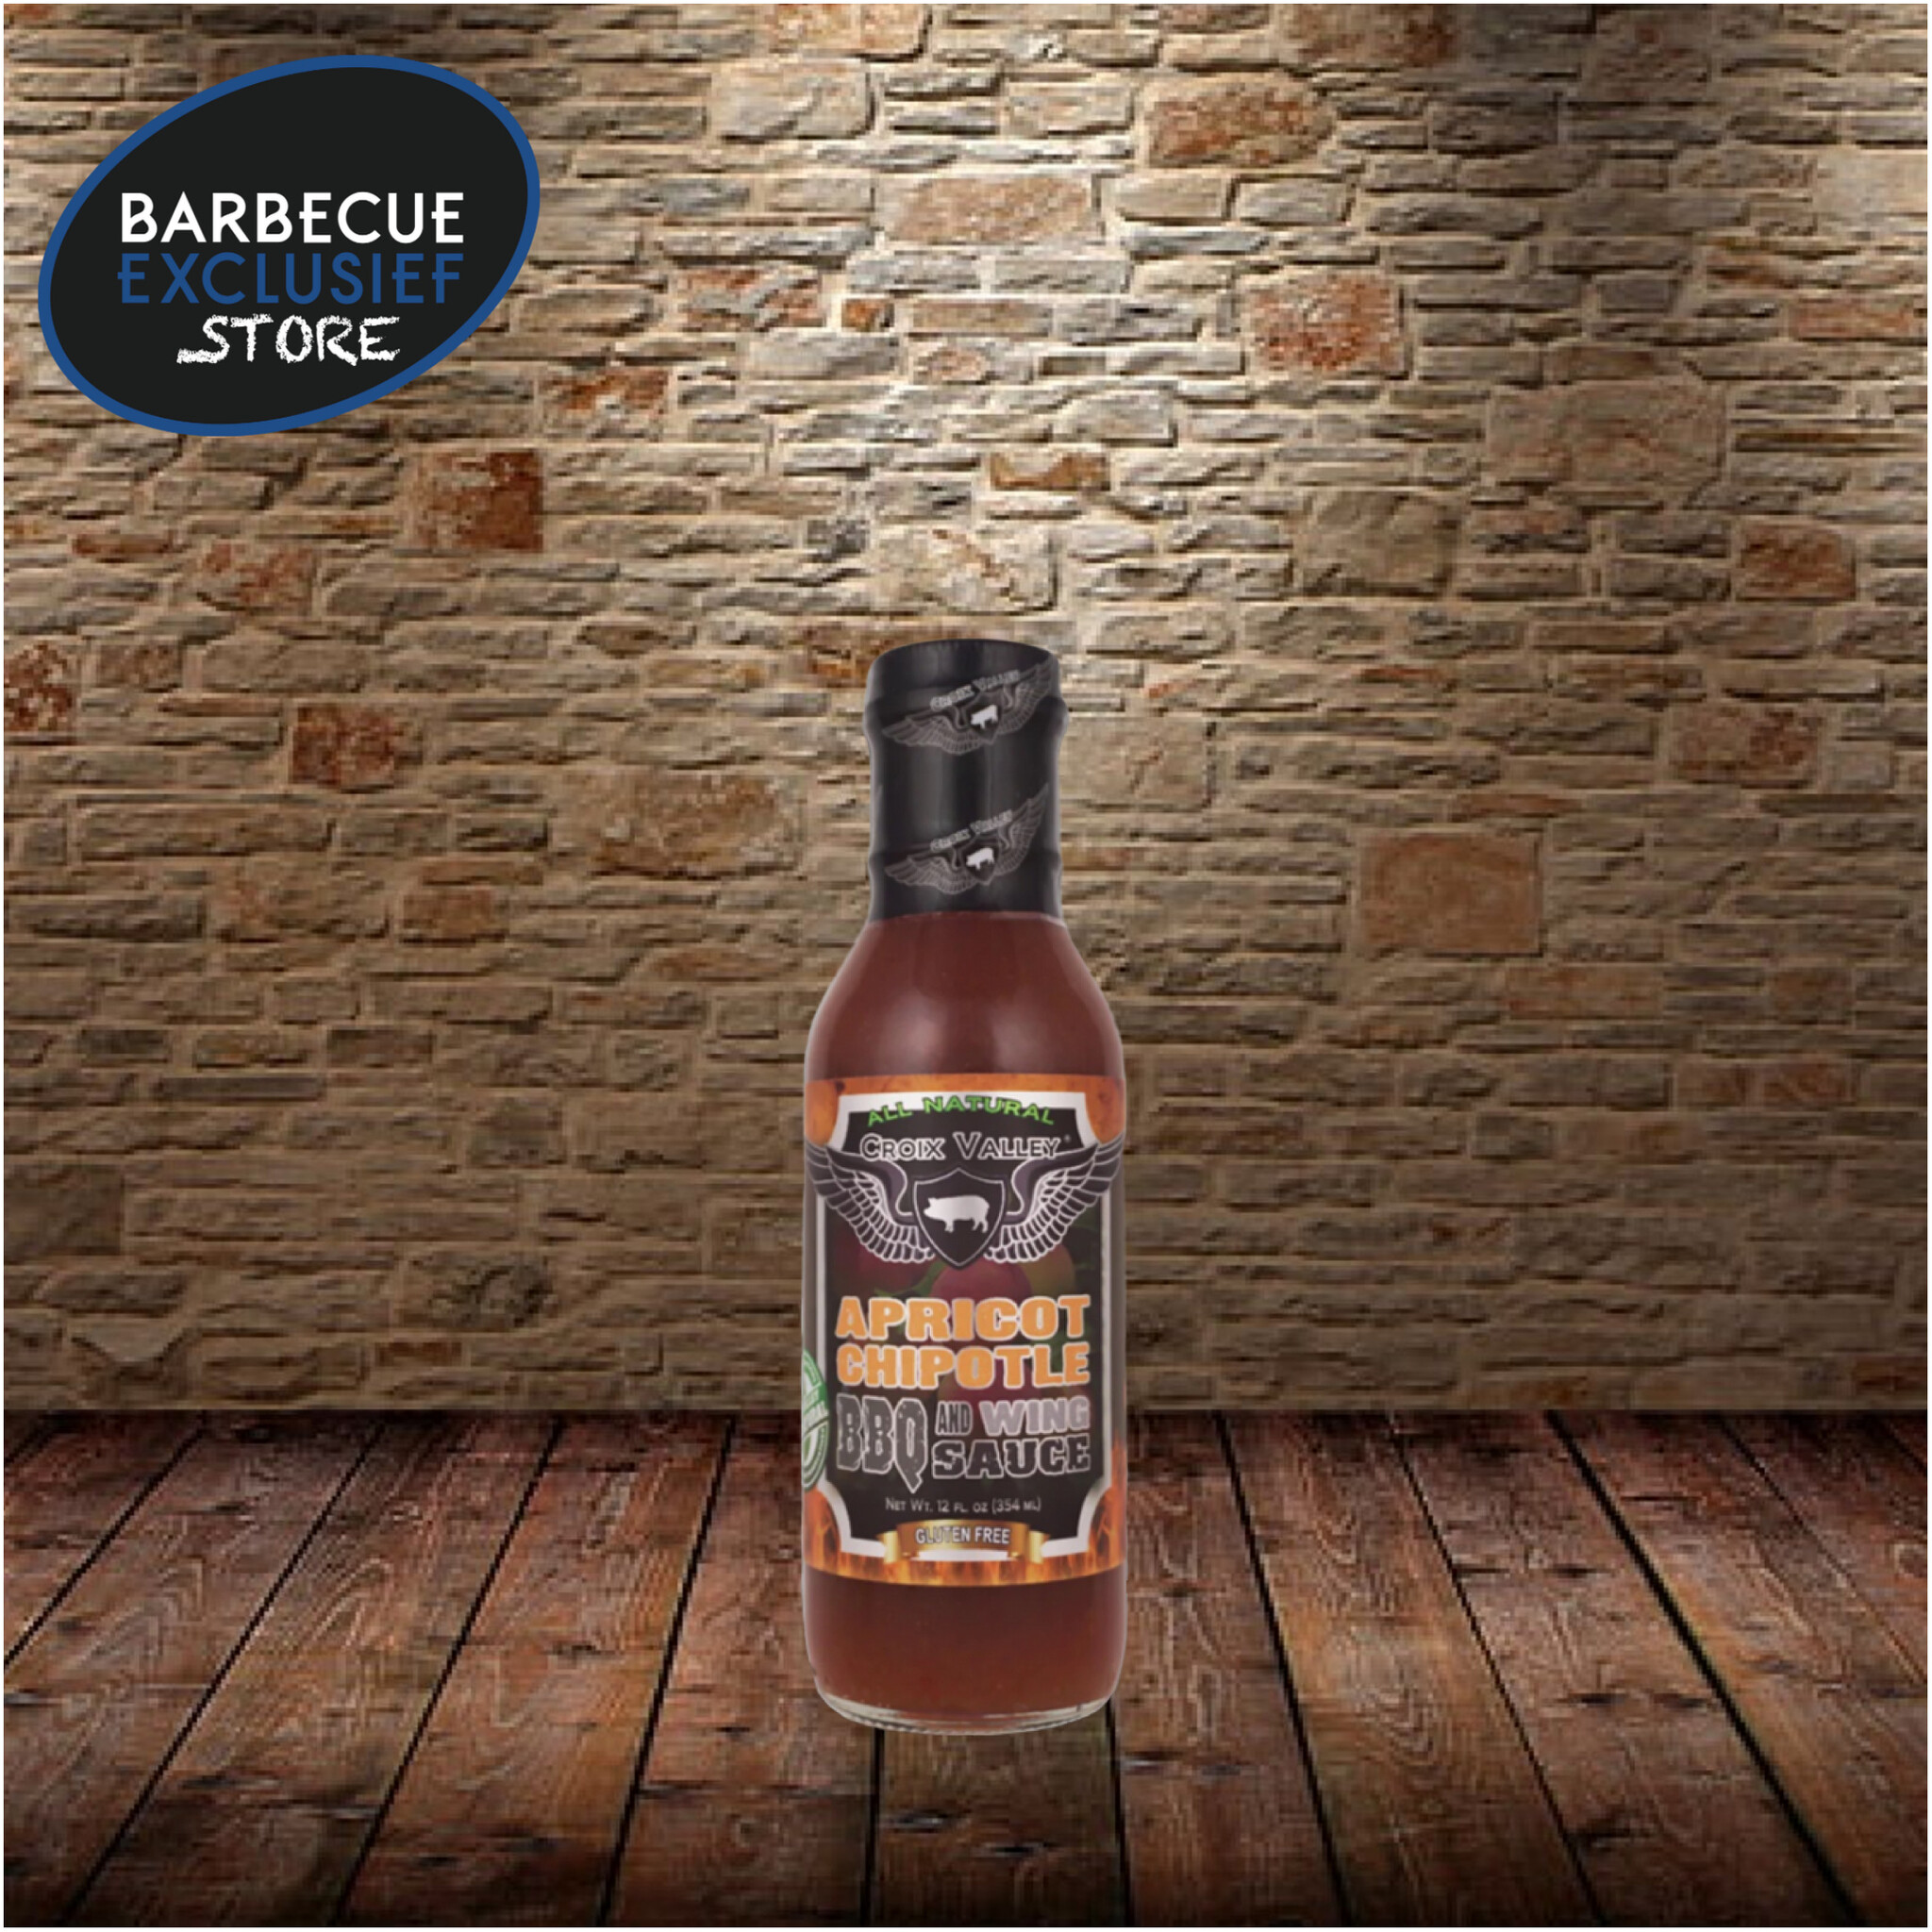 Croix Valley Croix Valley Apricot Chipotle BBQ and Wing Sauce